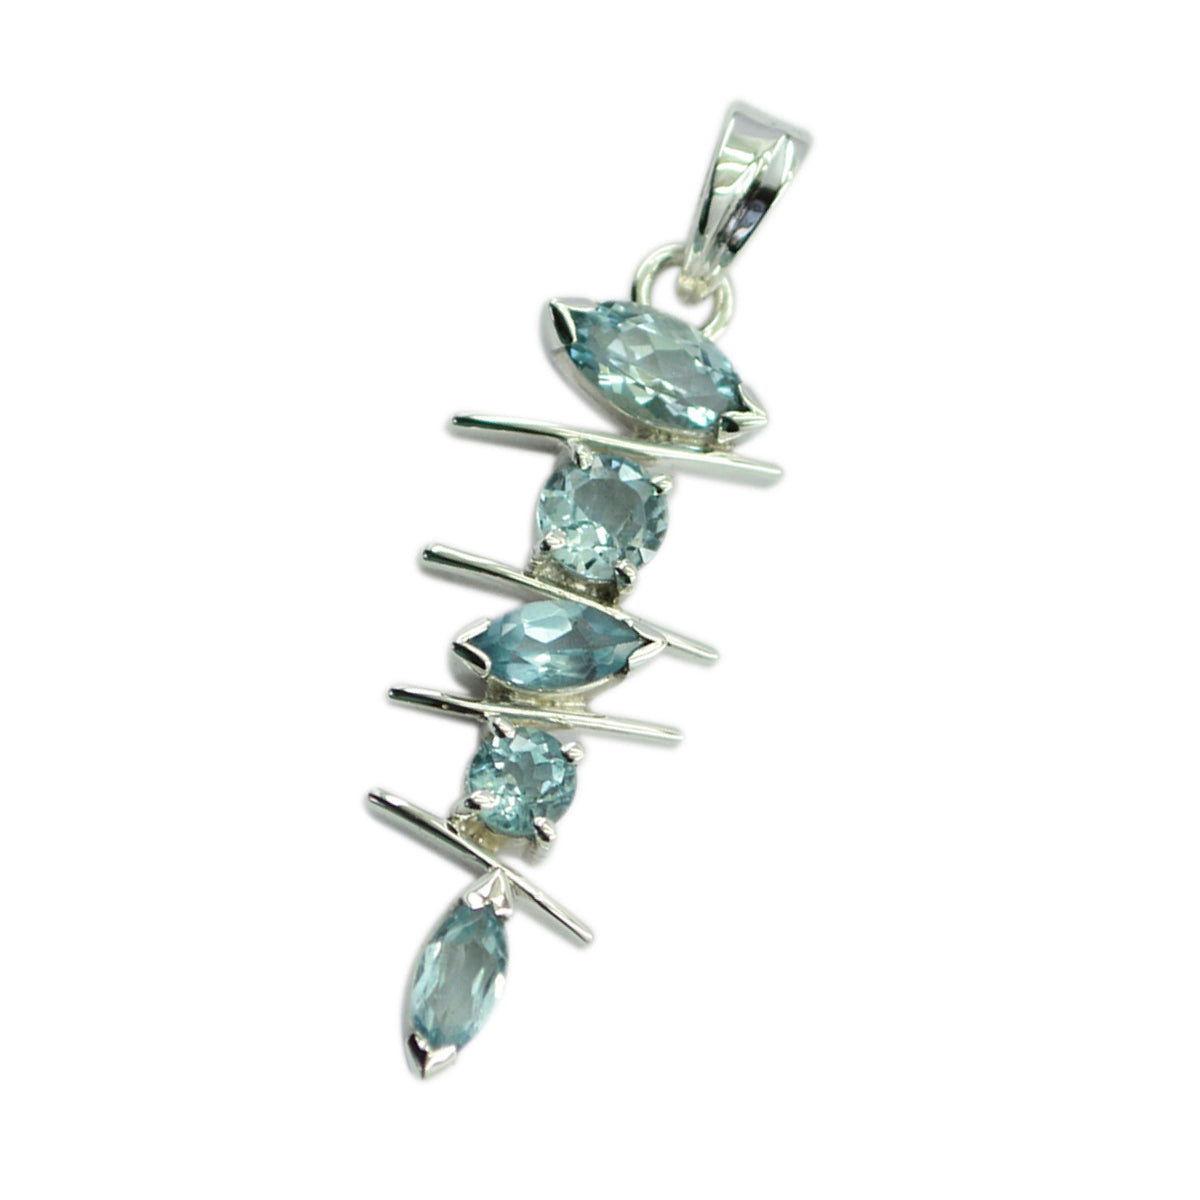 Riyo Comely Gemstone Multi Faceted Blue Blue Topaz Sterling Silver Pendant Gift For Christmas